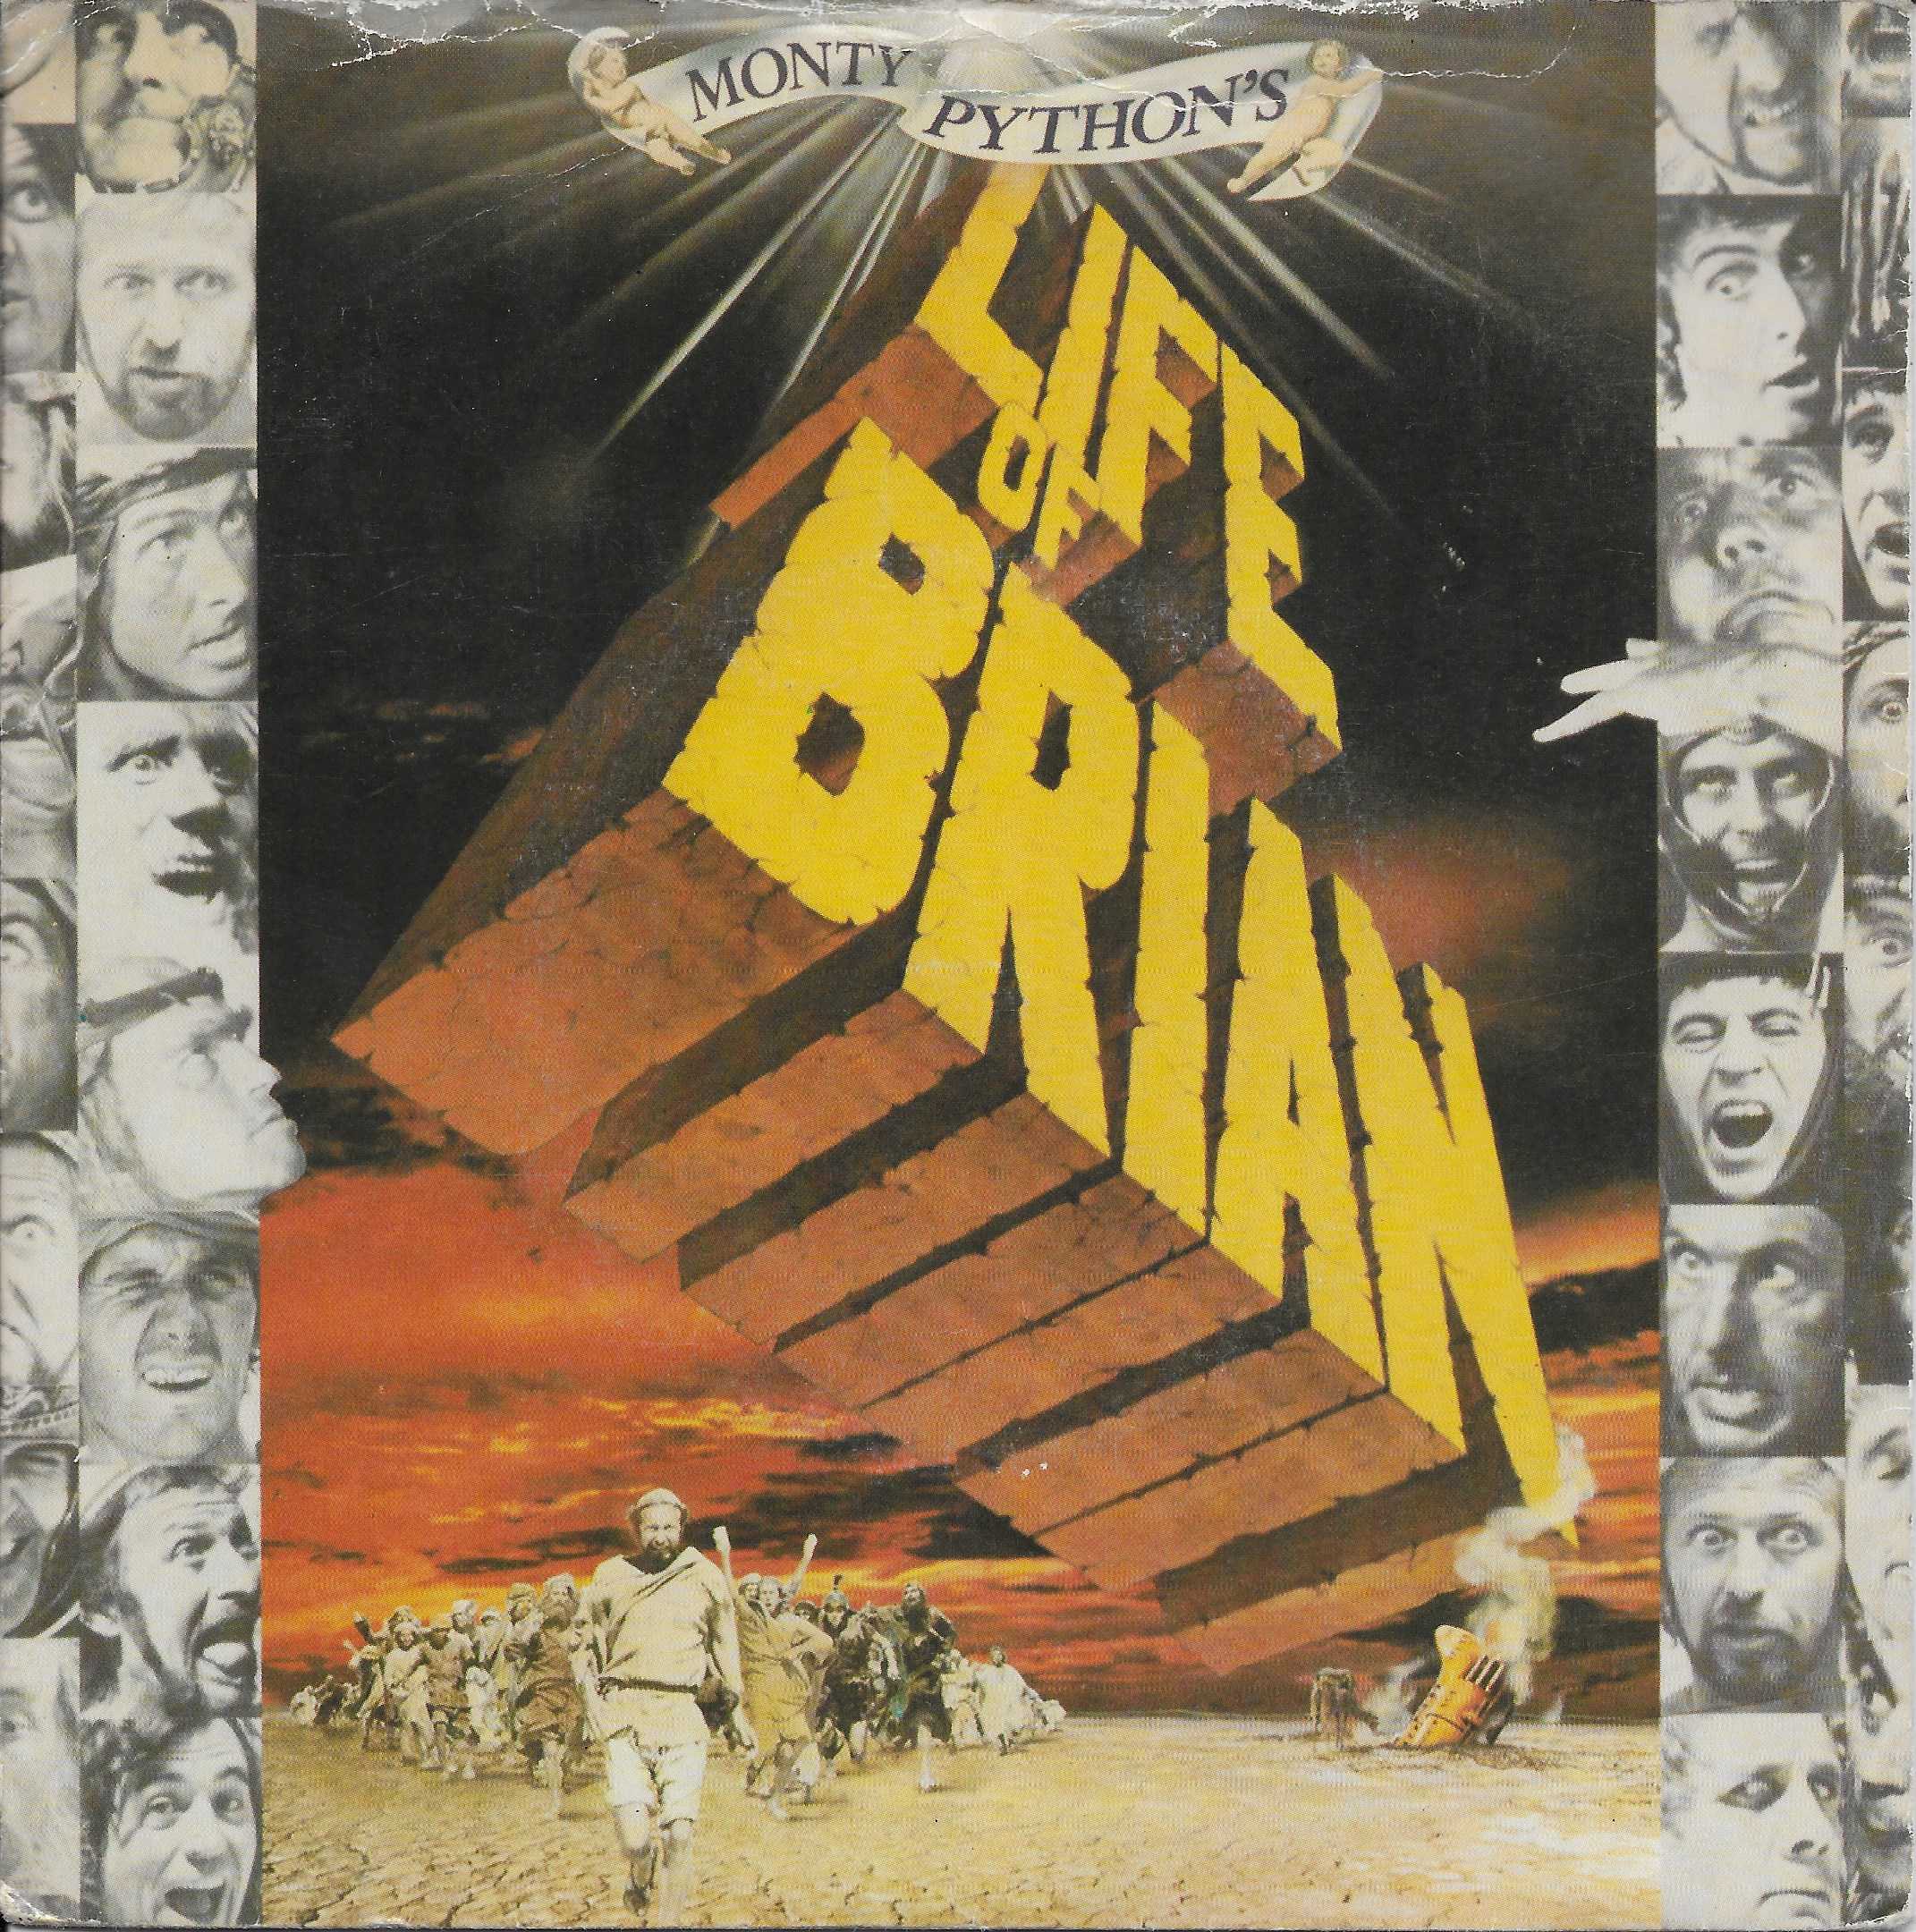 Picture of K 17495 Brian (Monty Python's flying circus) by artist Monty Python from the BBC singles - Records and Tapes library